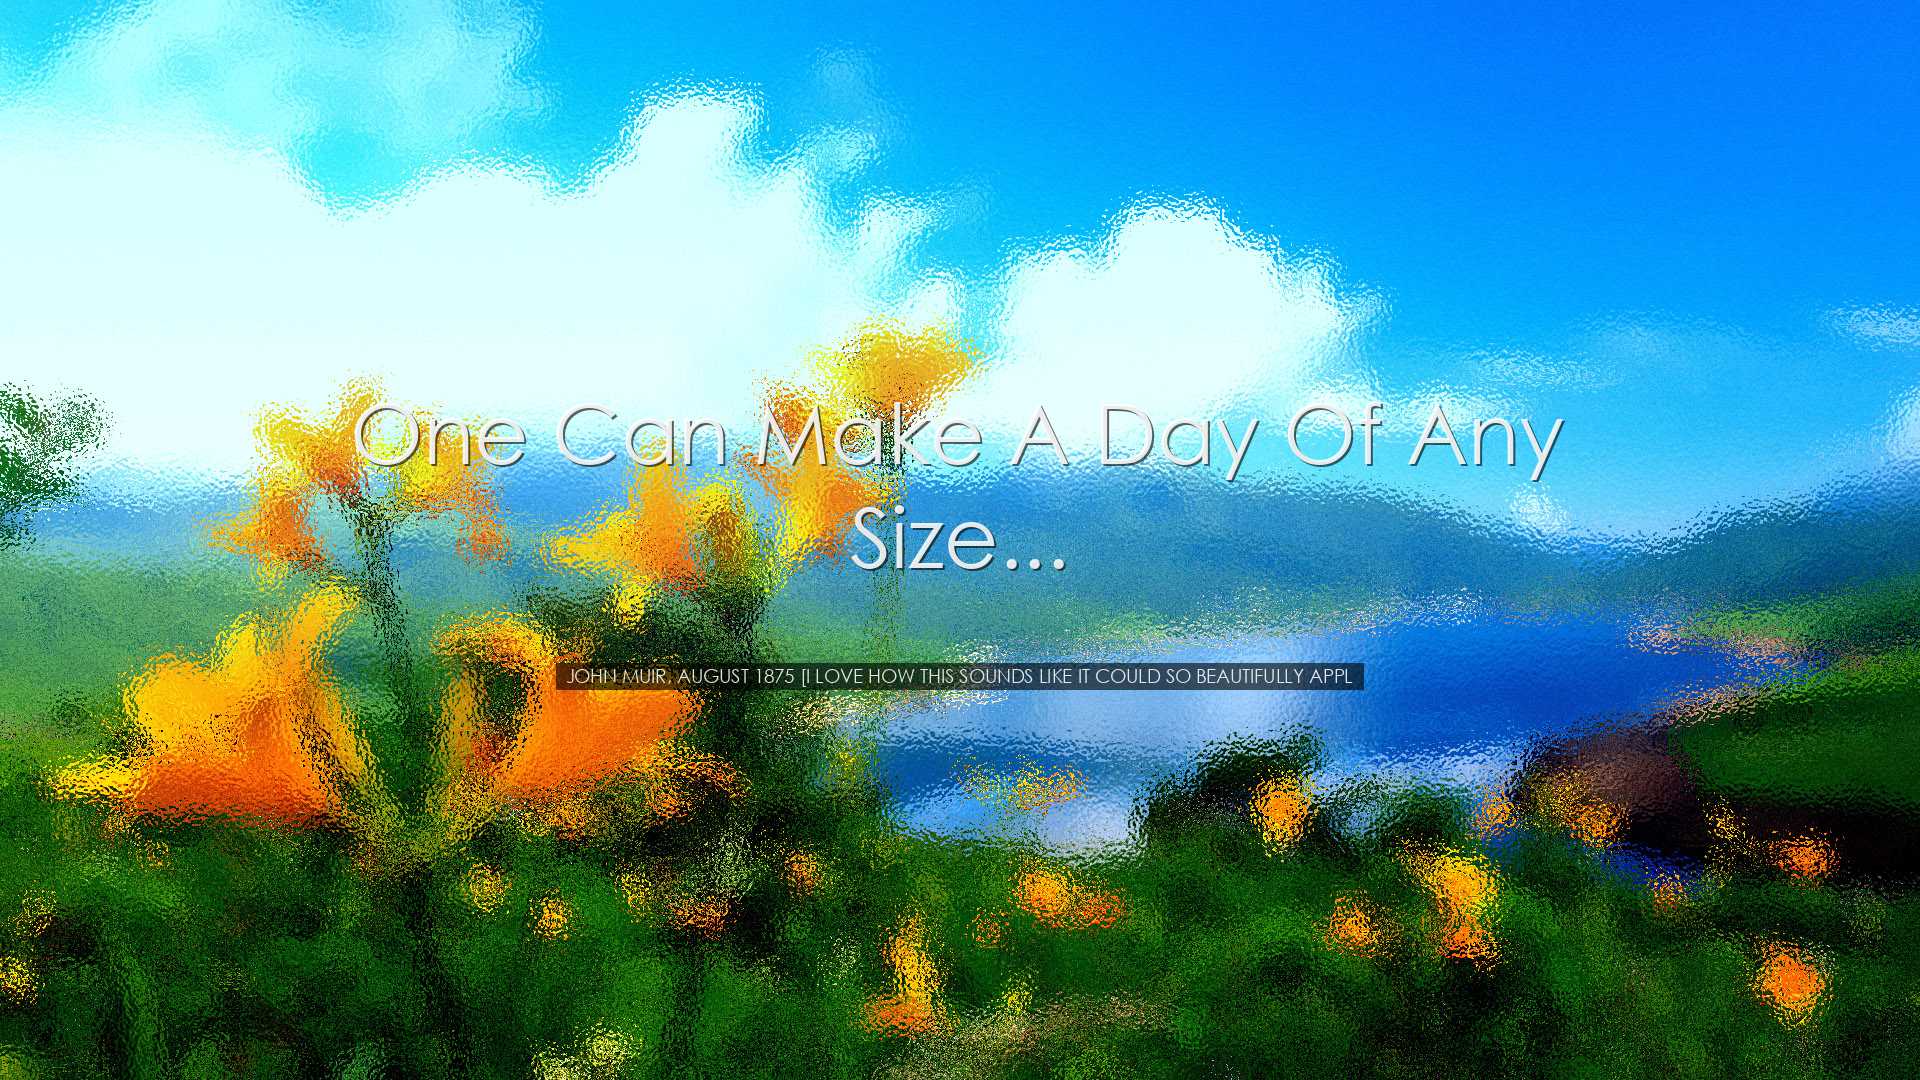 One can make a day of any size... - John Muir, August 1875 [I love